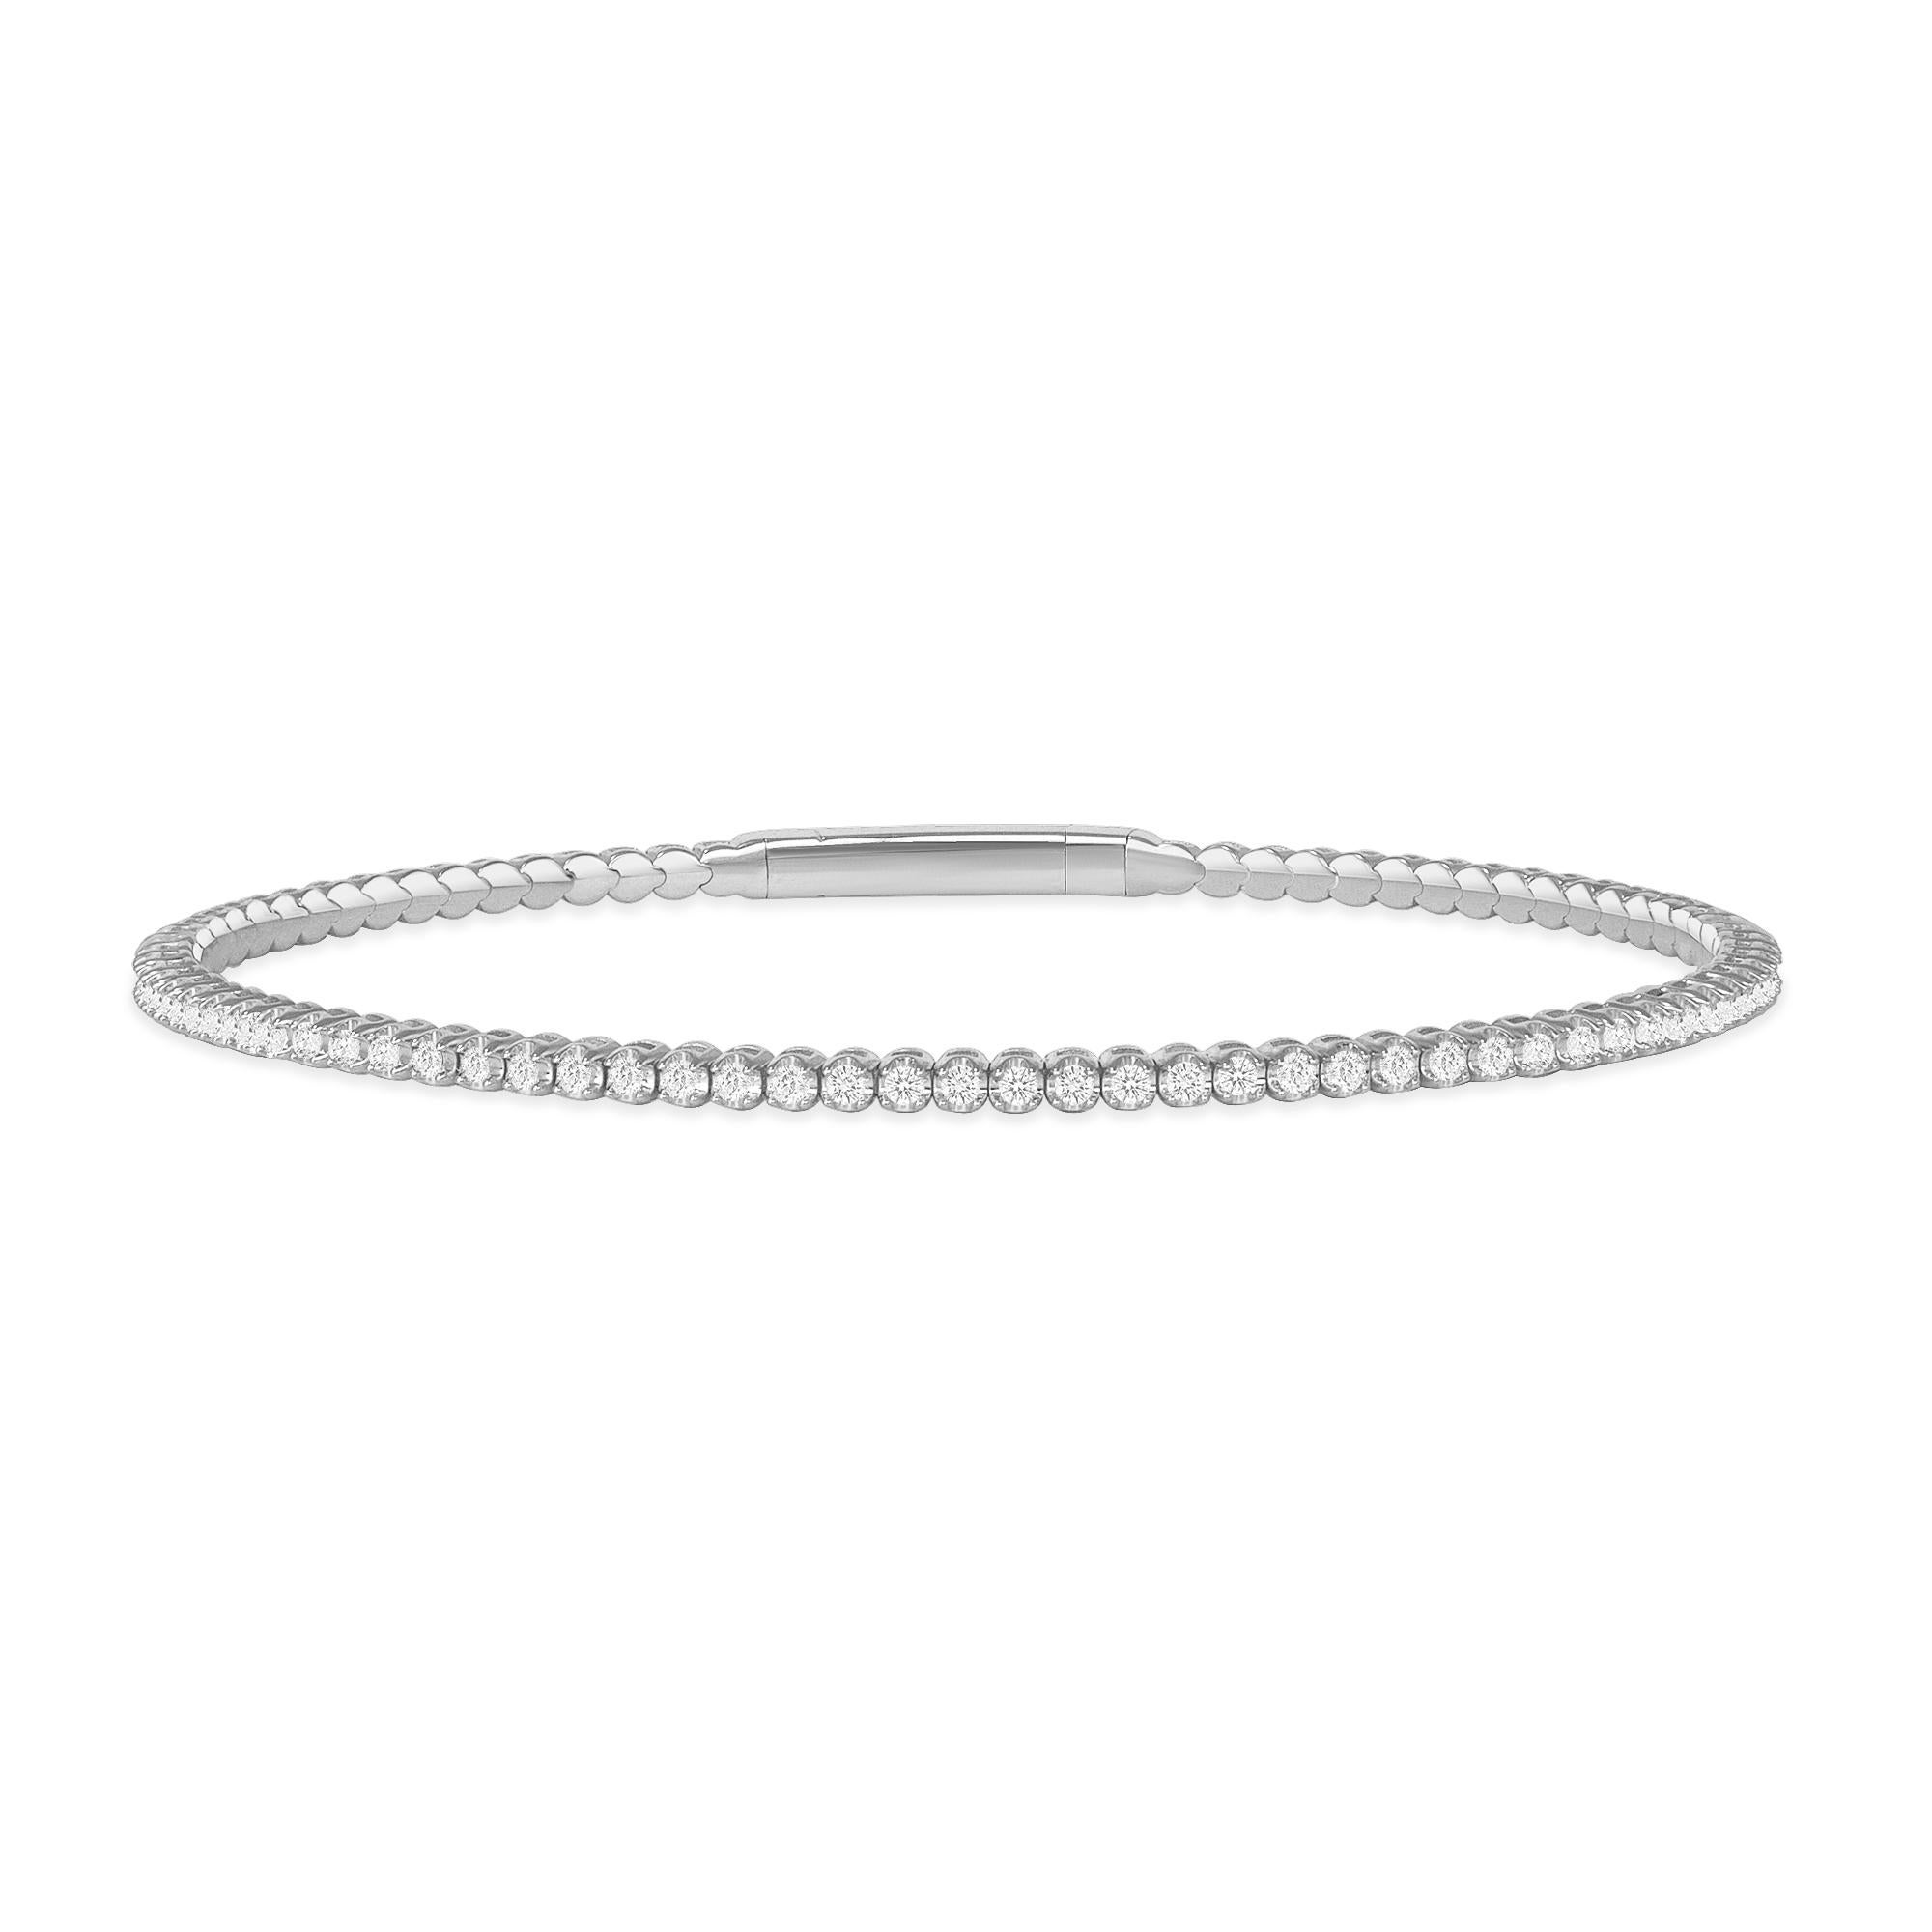 Flexible Bracelet Bangle 1.50 Carat Round Diamonds. Graded as SI Clarity and G-H color in a prong setting. Manufactured in standard size; 7 inches in length. Handcrafted in 14k Yellow Gold or White Gold setting. 